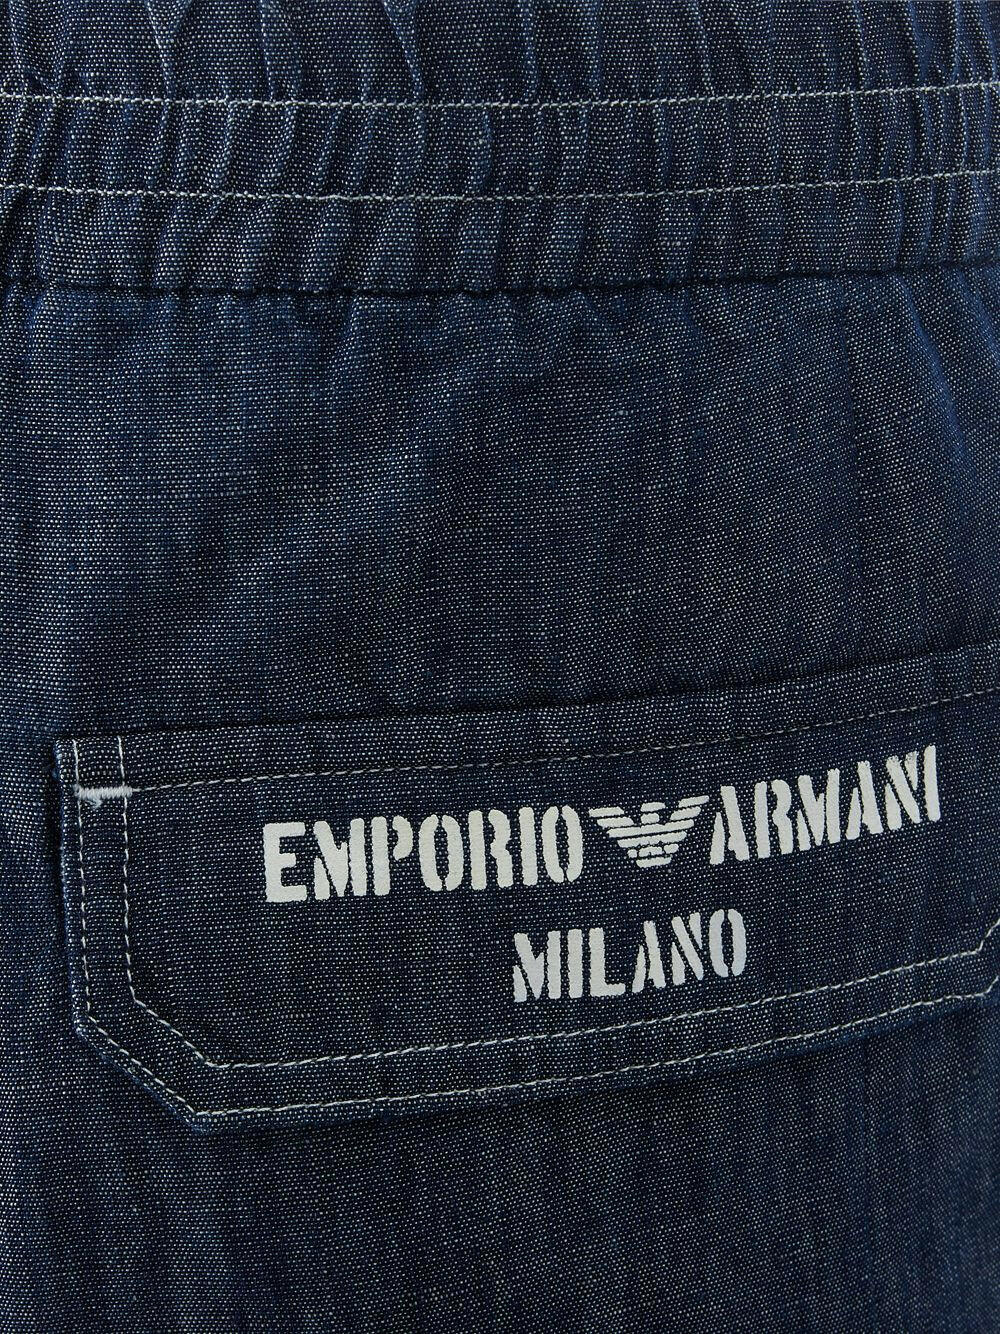 Emporio Armani Blue Trousers with Elastic Band on Waist - GENUINE AUTHENTIC BRAND LLC  